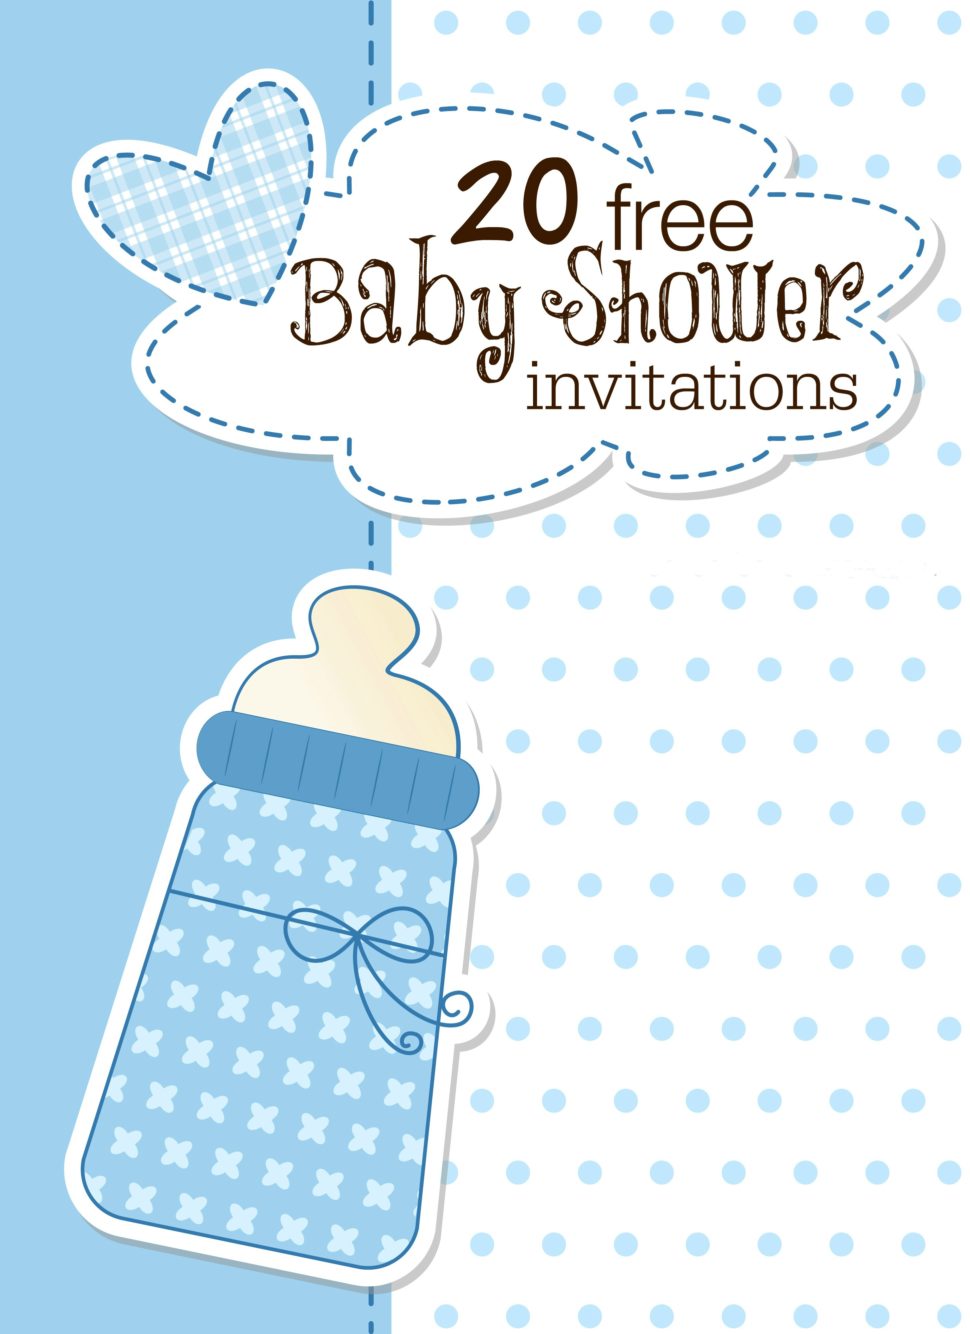 Medium Size of Baby Shower:nautical Baby Shower Invitations For Boys Baby Girl Themes For Bedroom Baby Shower Ideas Baby Shower Decorations Themes For Baby Girl Nursery Nautical Baby Shower Invitations For Boys Baby Girl Themes For Bedroom Baby Shower Ideas Baby Shower Decorations Themes For Baby Girl Nursery